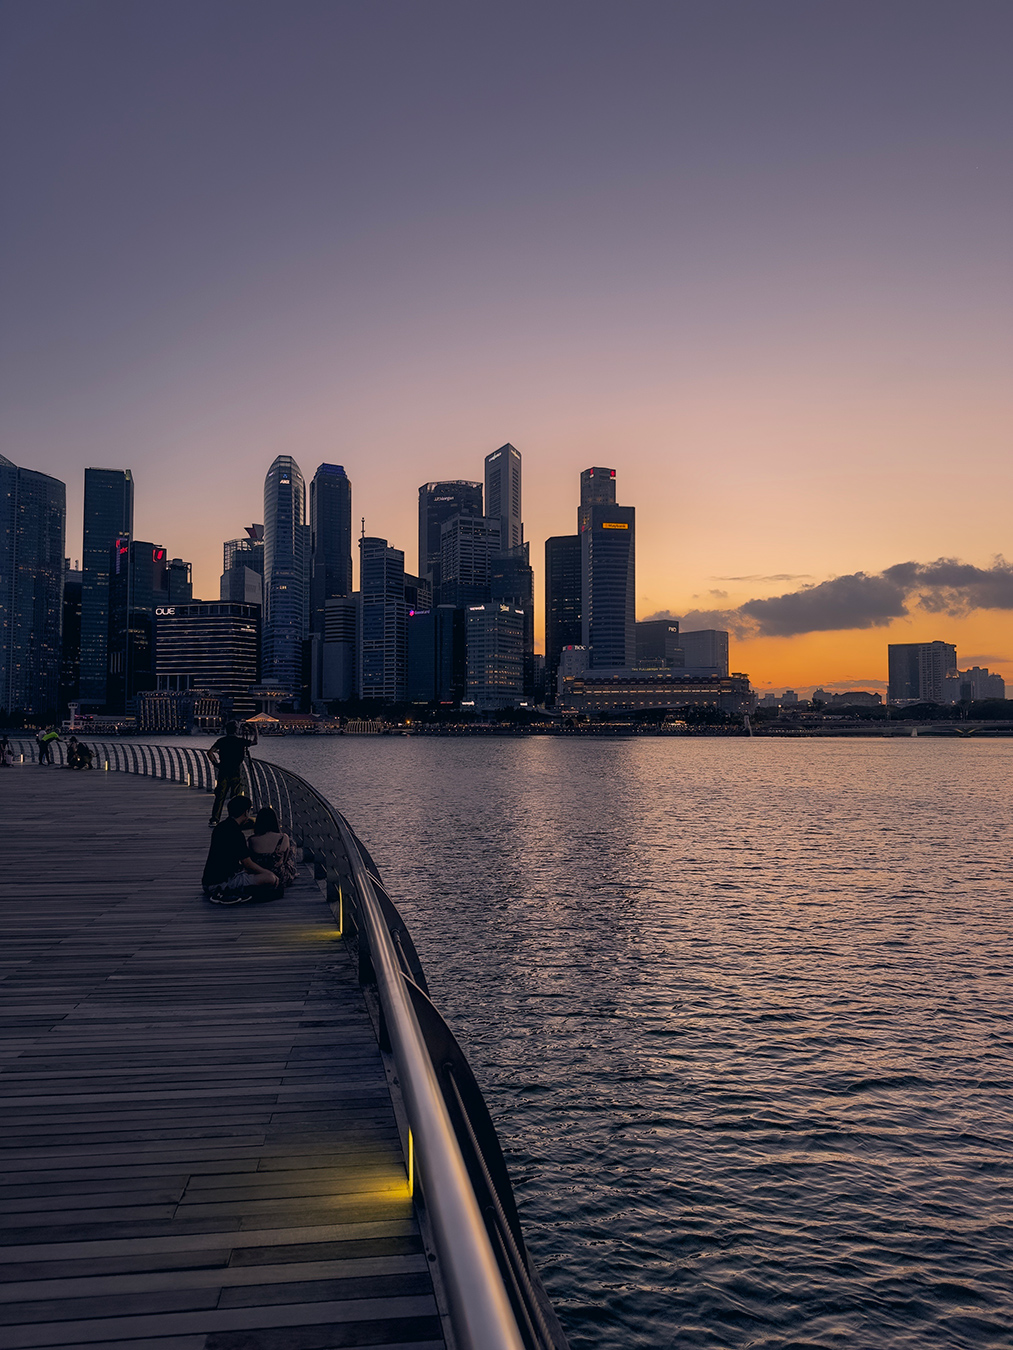 Finance District as seen from the Marina Bay at sunset